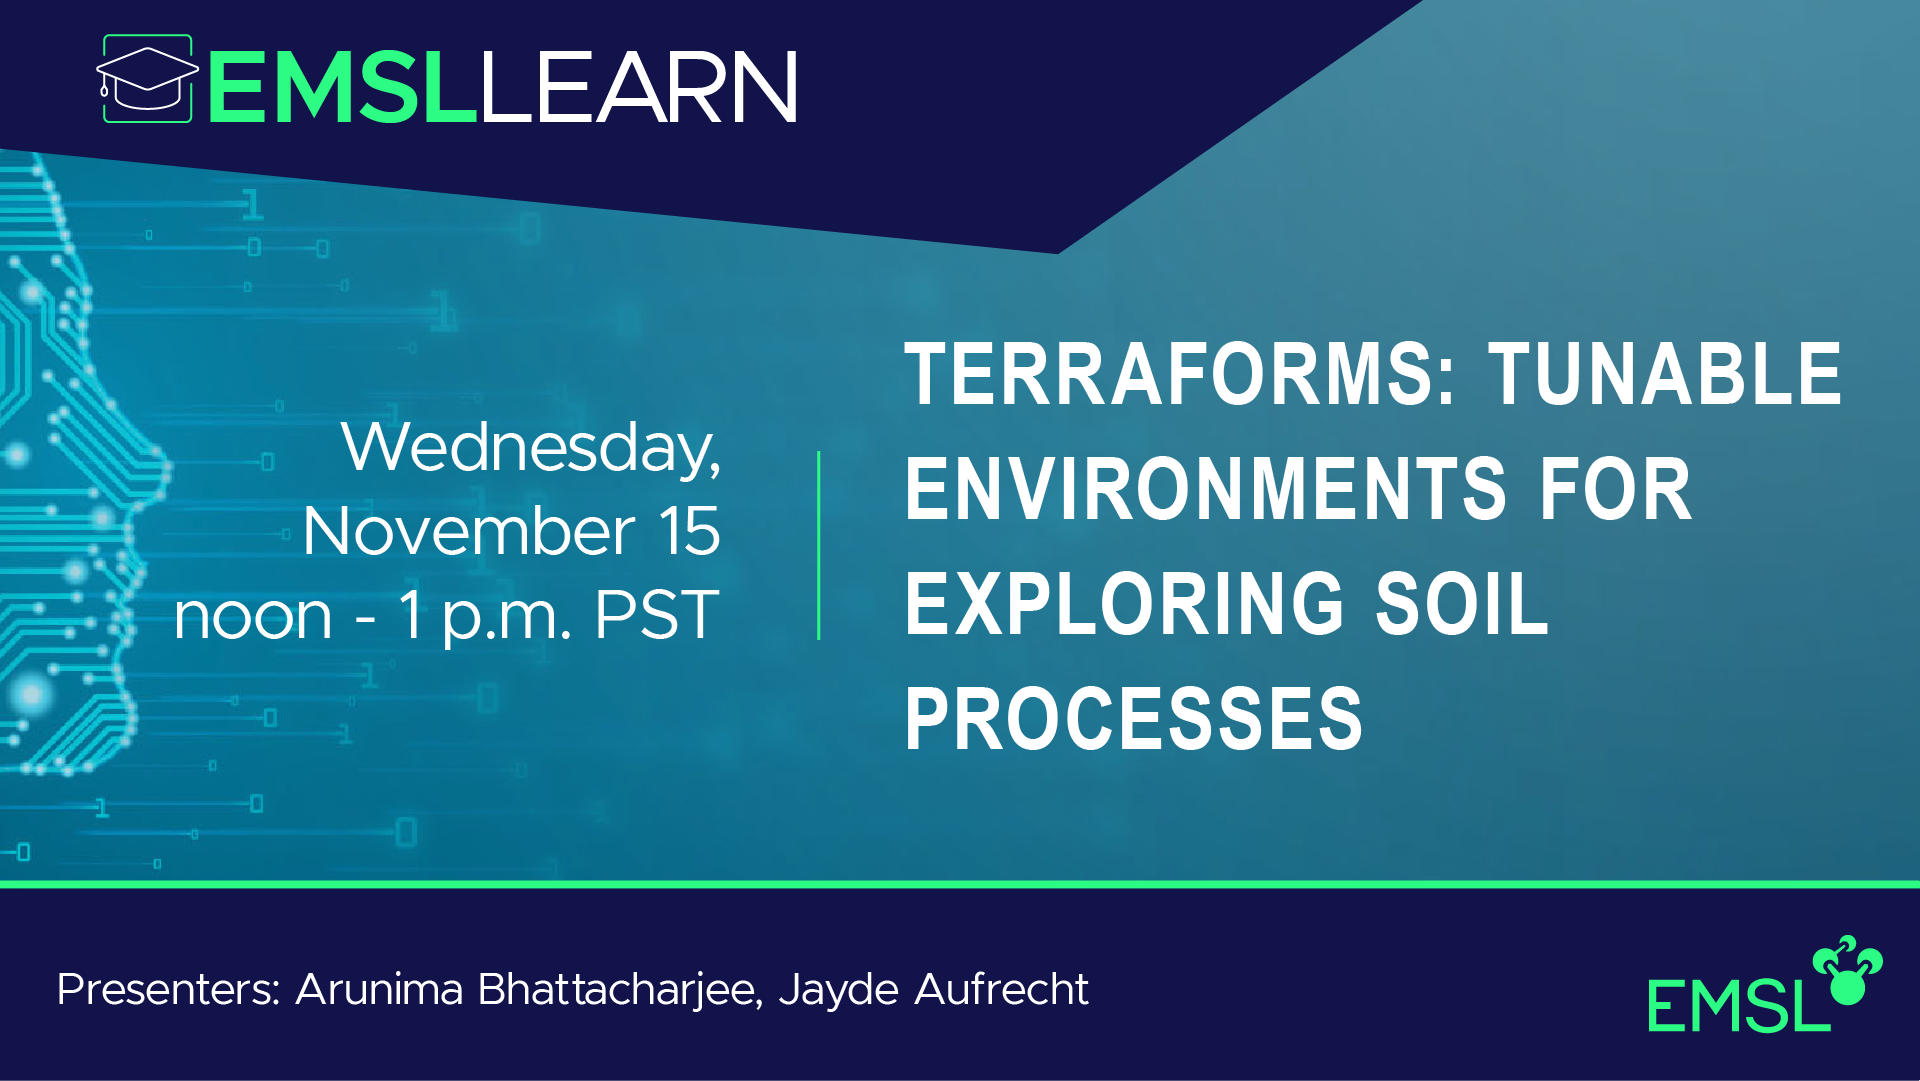 EMSL LEARN Webinar Series presentation on TerraForms: Tunable Environments for Exploring Soil Processes, 12 to 1 p.m. Pacific Standard Time, Wednesday, Nov. 15. Presenters: Arunima Bhattacharjee and Jayde Aufrecht. EMSL logo.